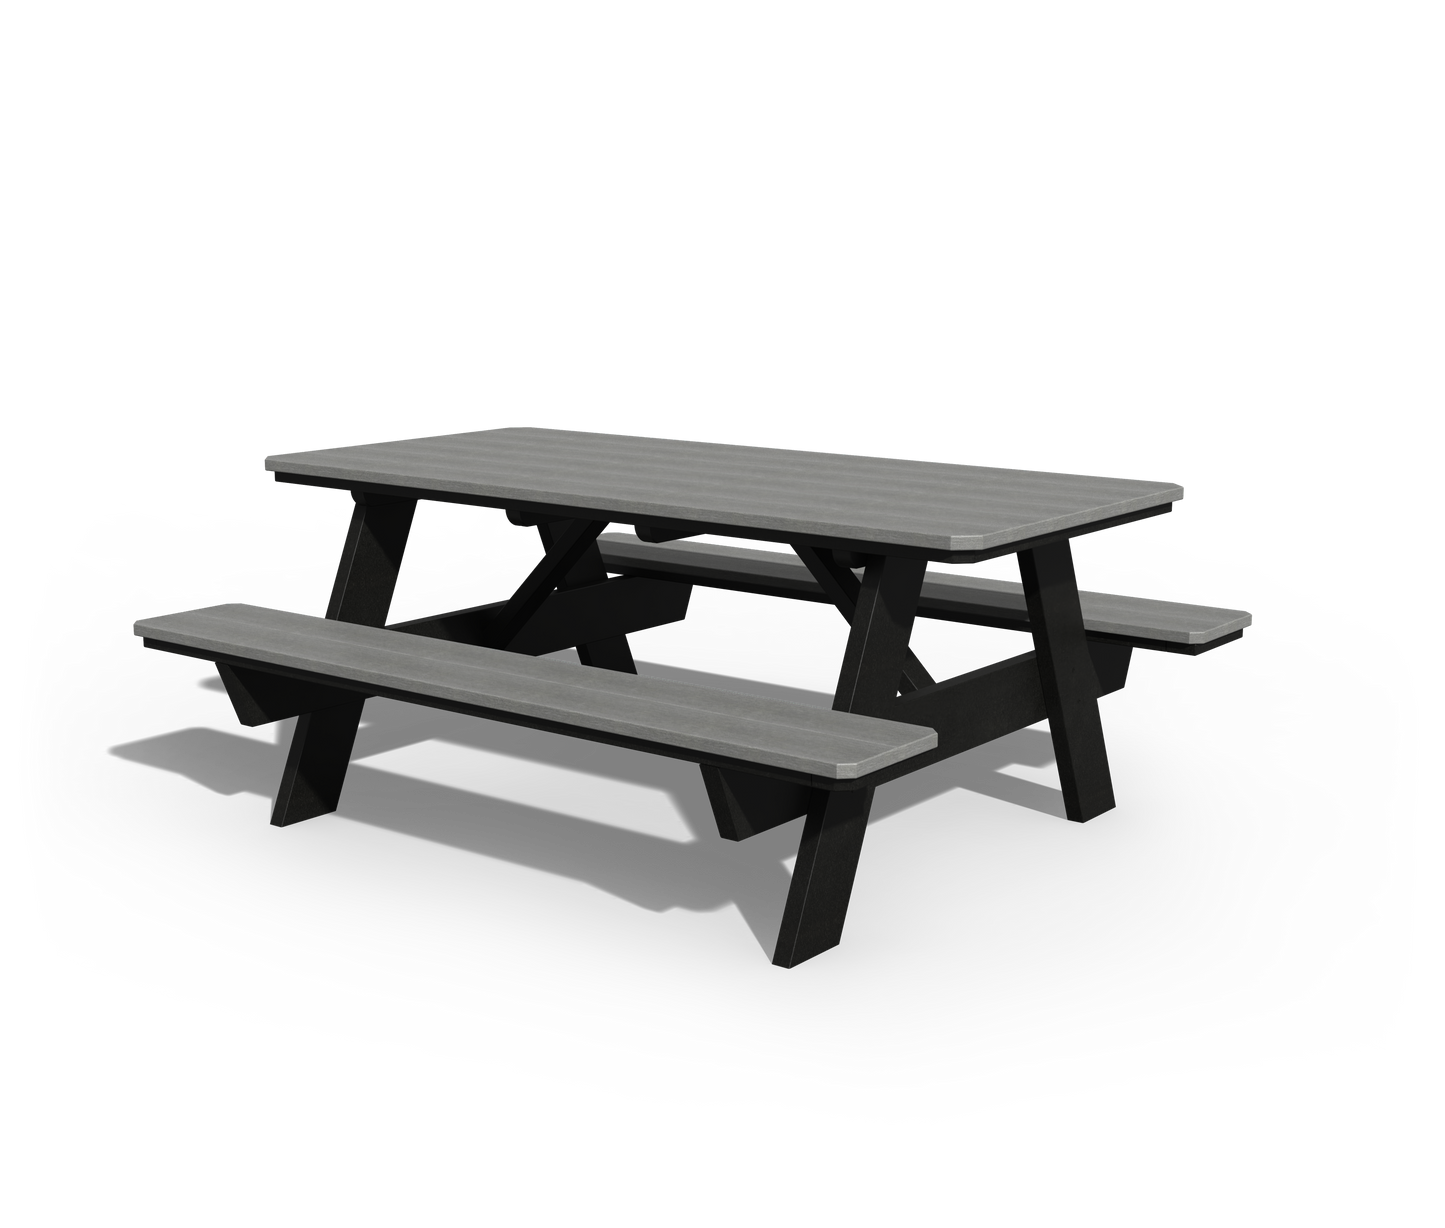 Patiova Recycled Plastic 3'x6' Picnic Table with Seats Attached - LEAD TIME TO SHIP 3 WEEKS